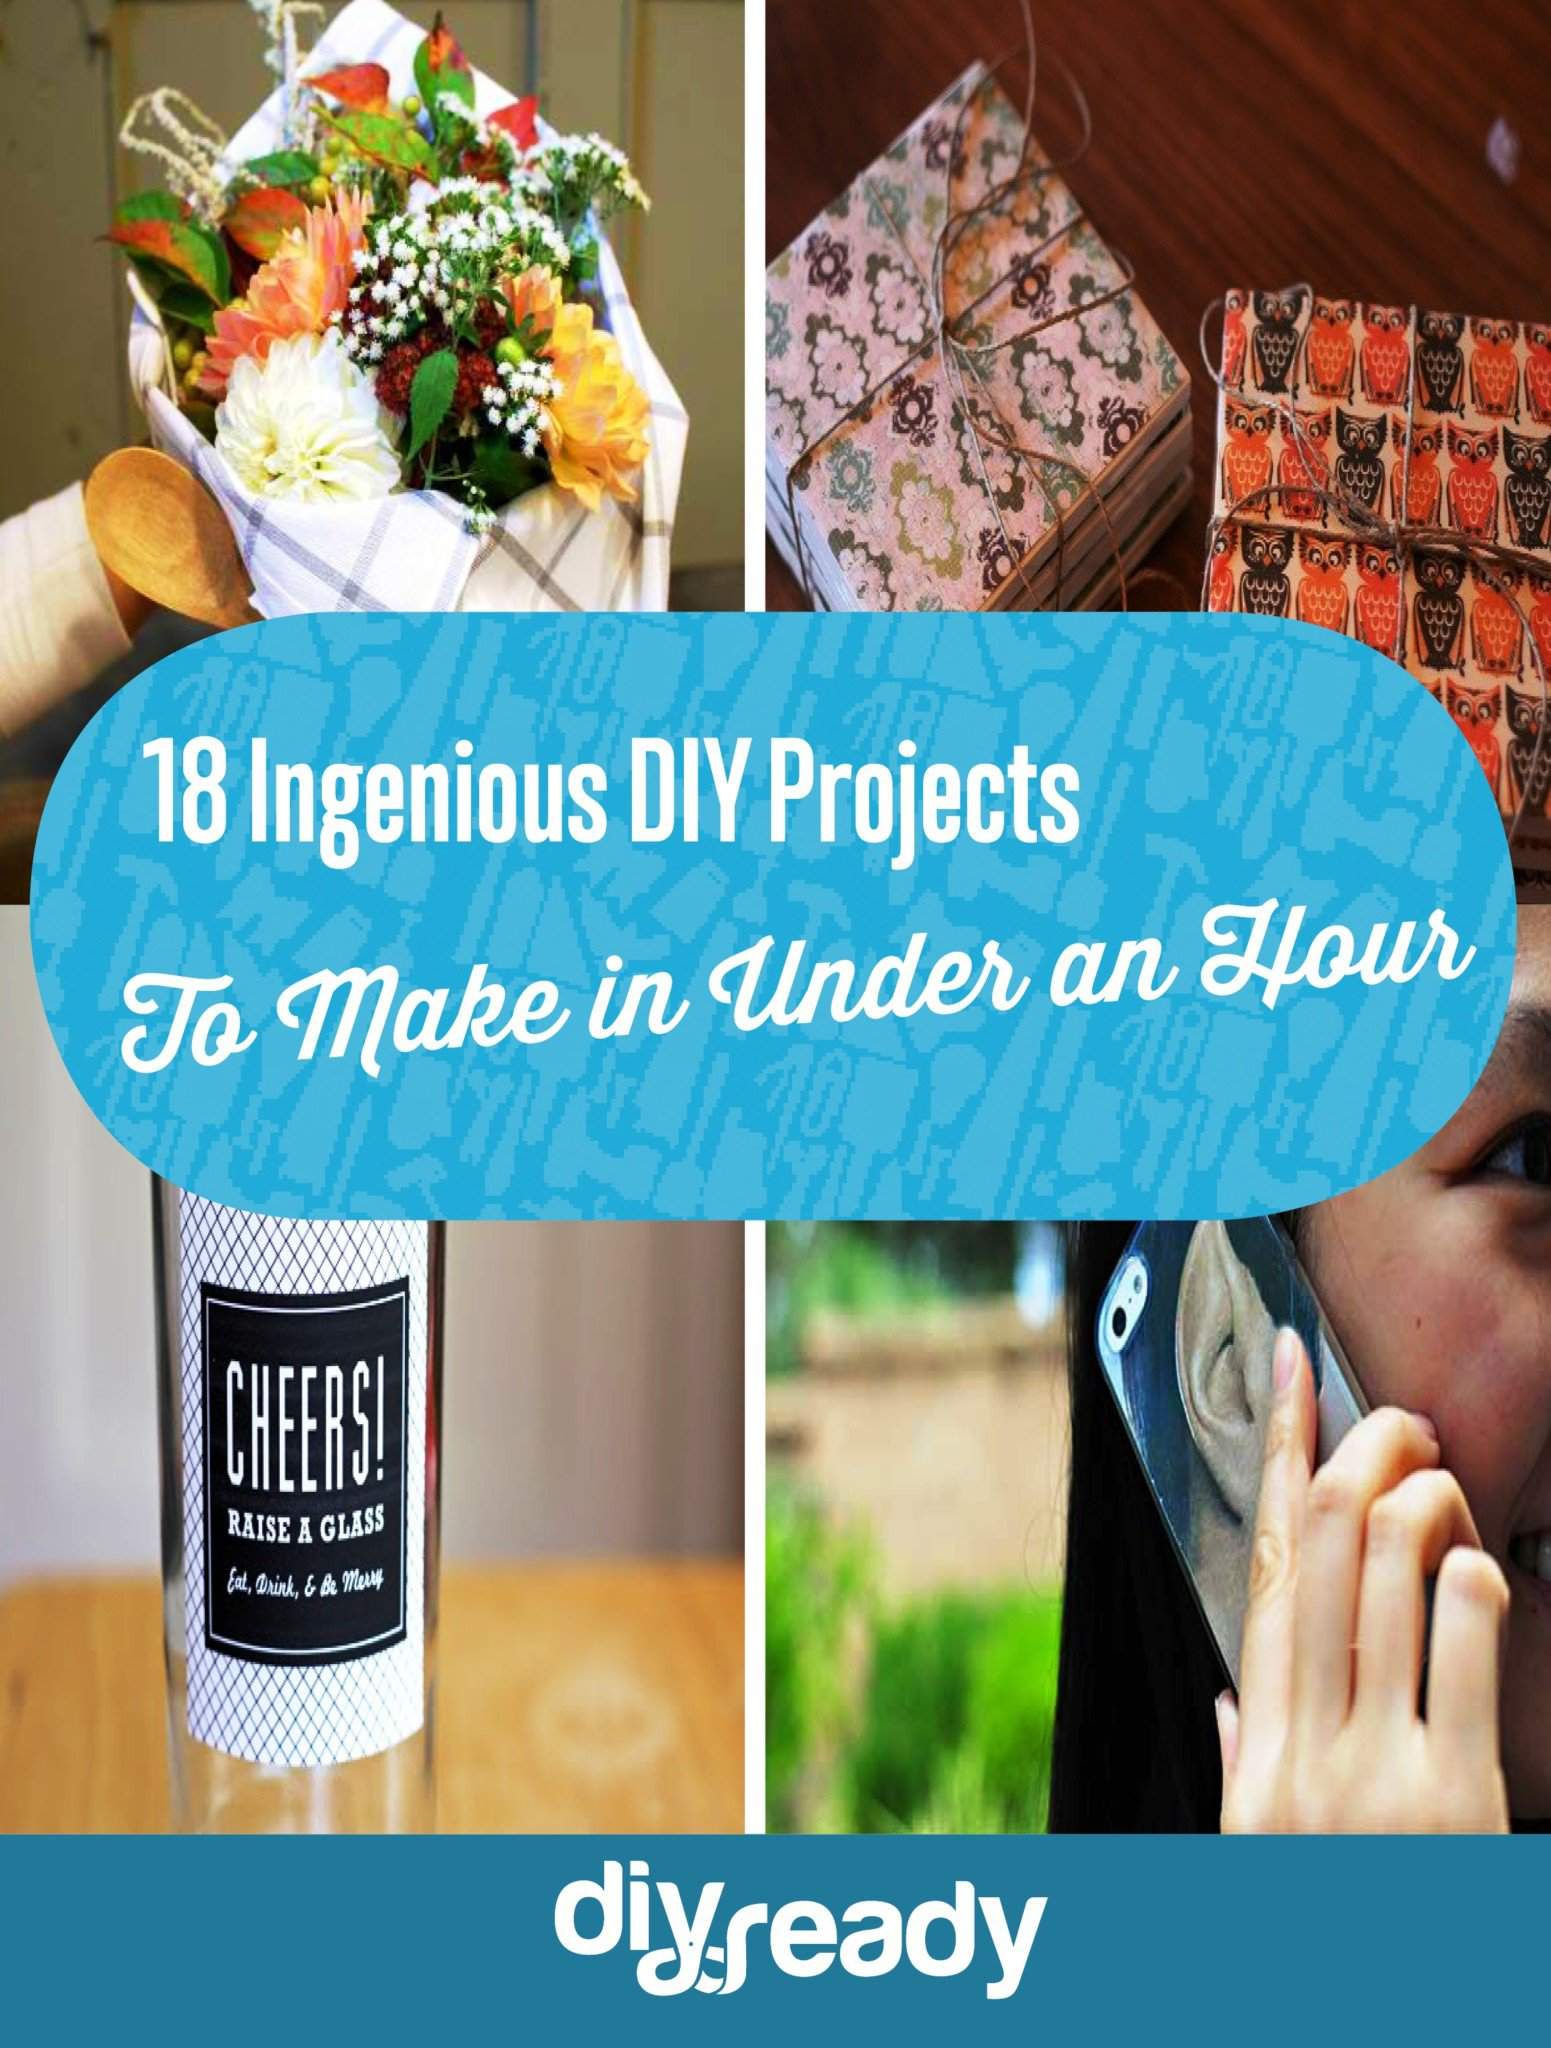 18 Ingenious DIY Projects to Make in Under an Hour